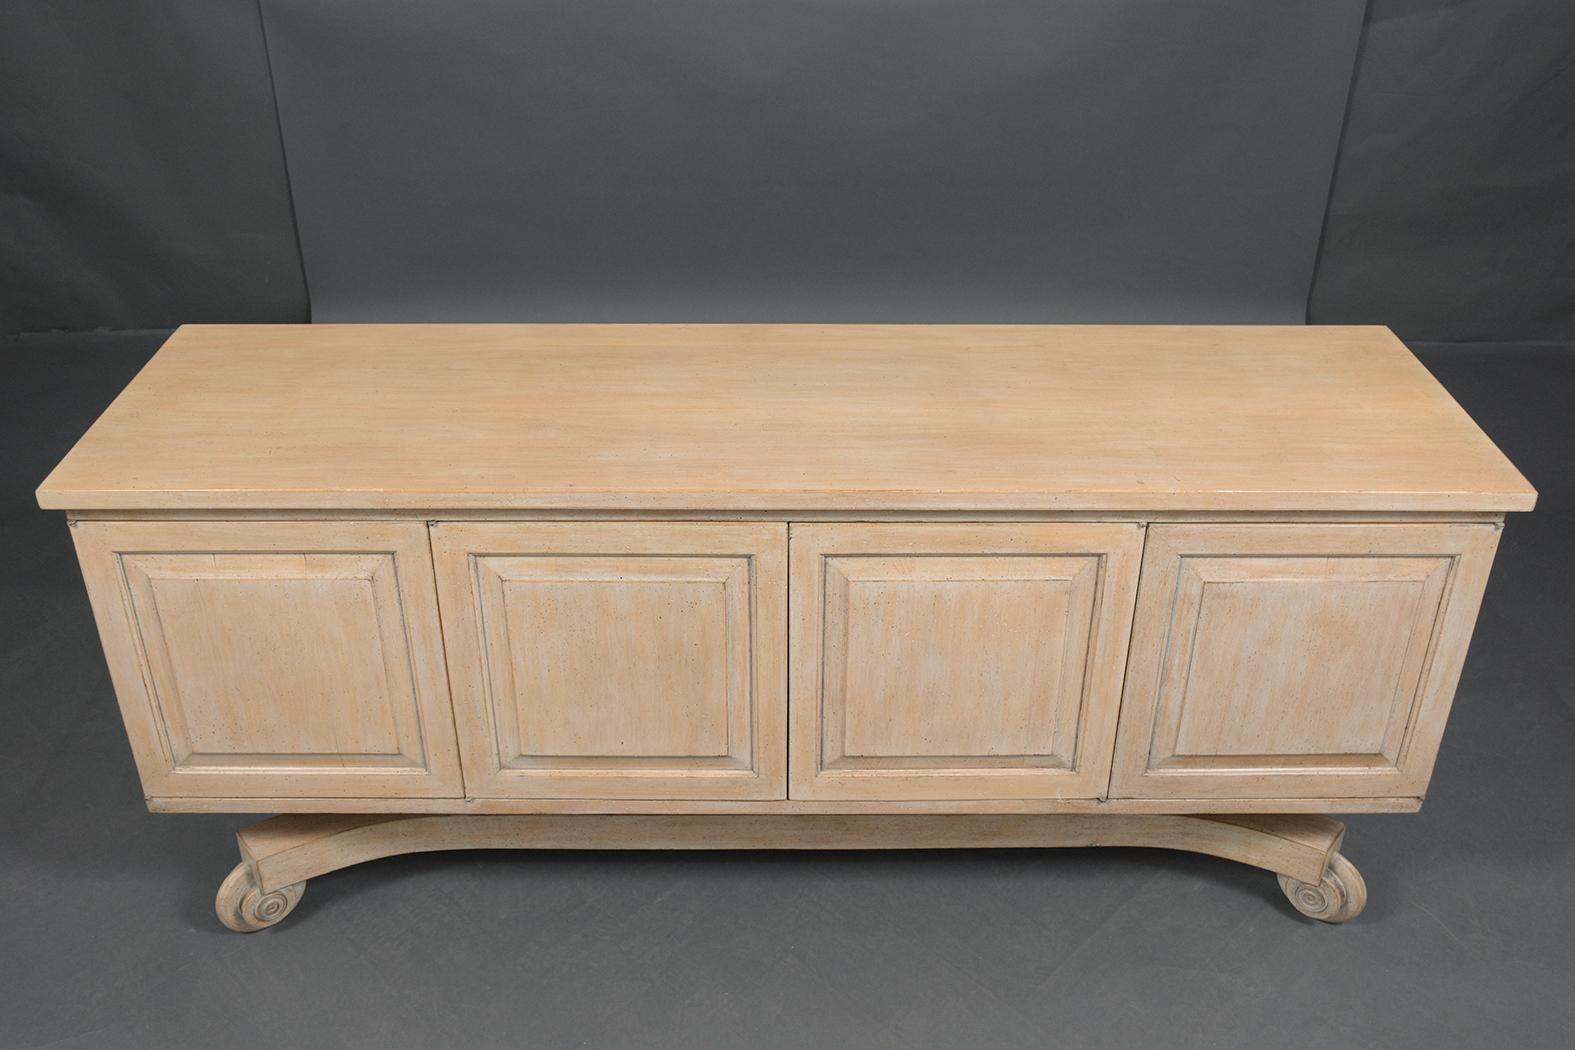 This vintage Italian buffet handcrafted out of maple wood has been professionally restored by our professional team of expert craftsmen and features a new washed finish. The piece has a solid wood top, four-paneled doors, and inside it has four